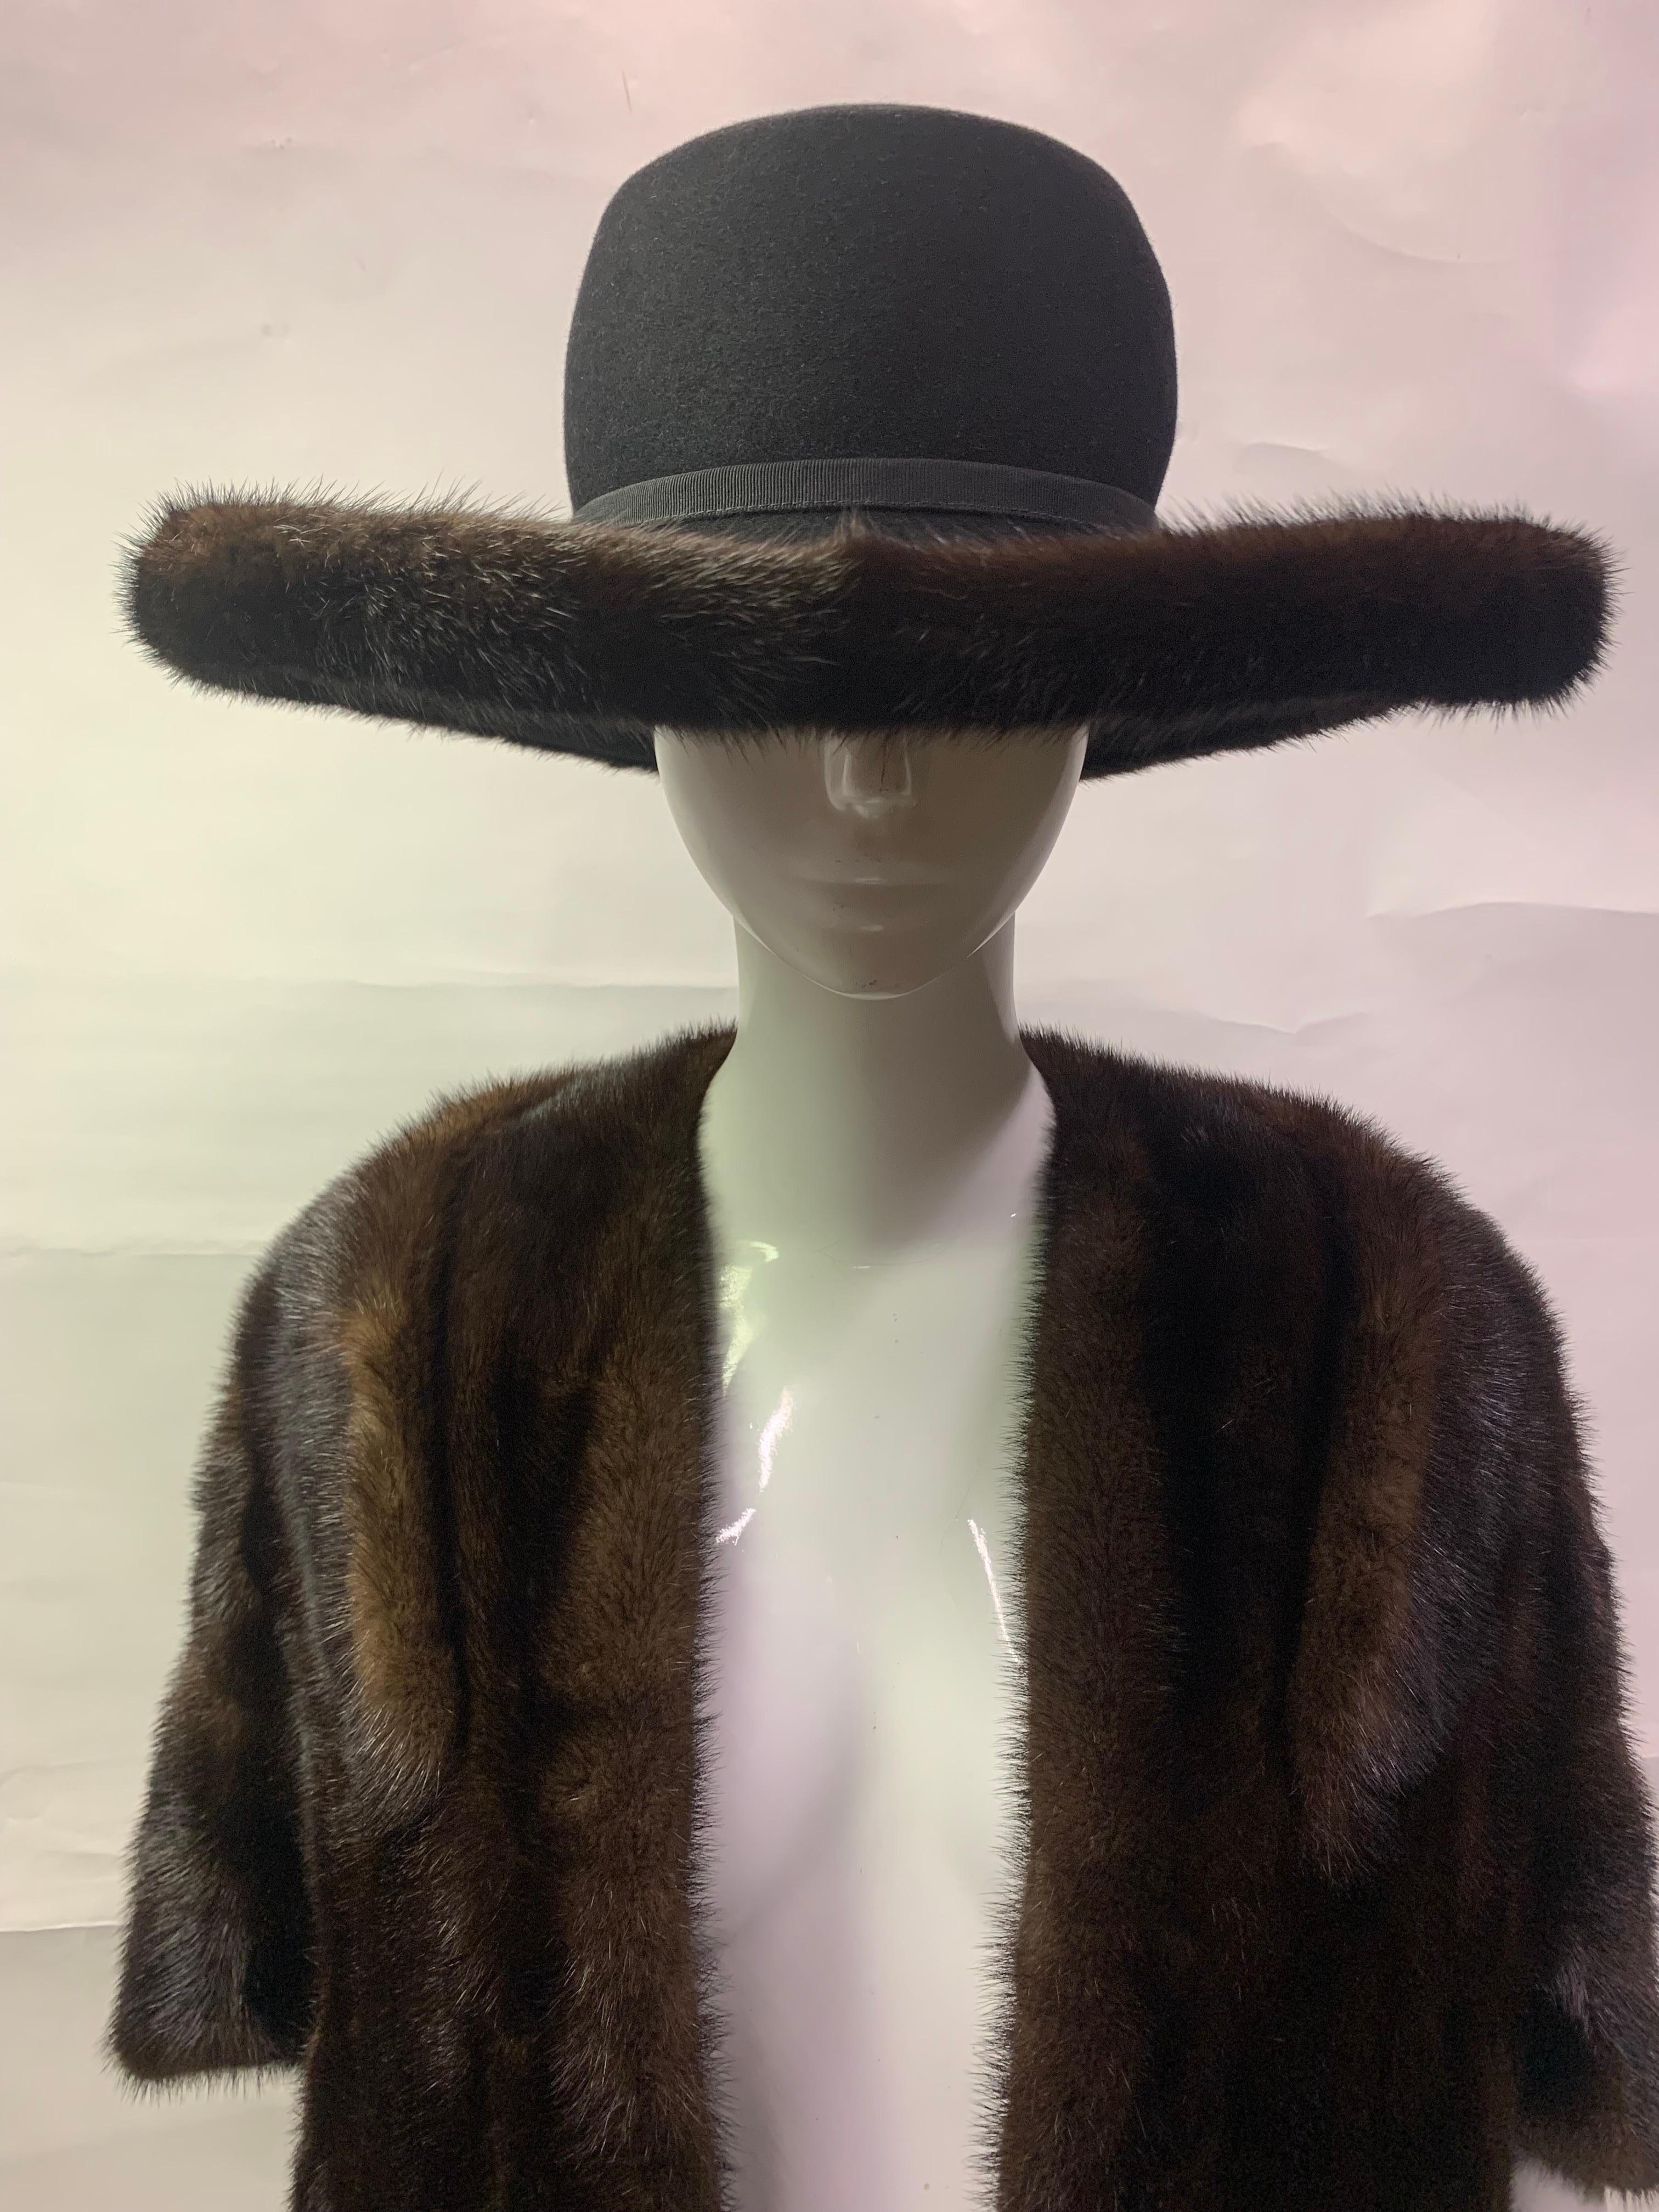 1990s Patricia Underwood Black Wool Felt Fedora w Mink Trimmed Brim & Mink Wrap:  Fabulously large brimmed fedora with a 1960s coordinating mink sculpted stole wrap. Hat is a larger size and stole is one size. Great for a holiday casual look! 